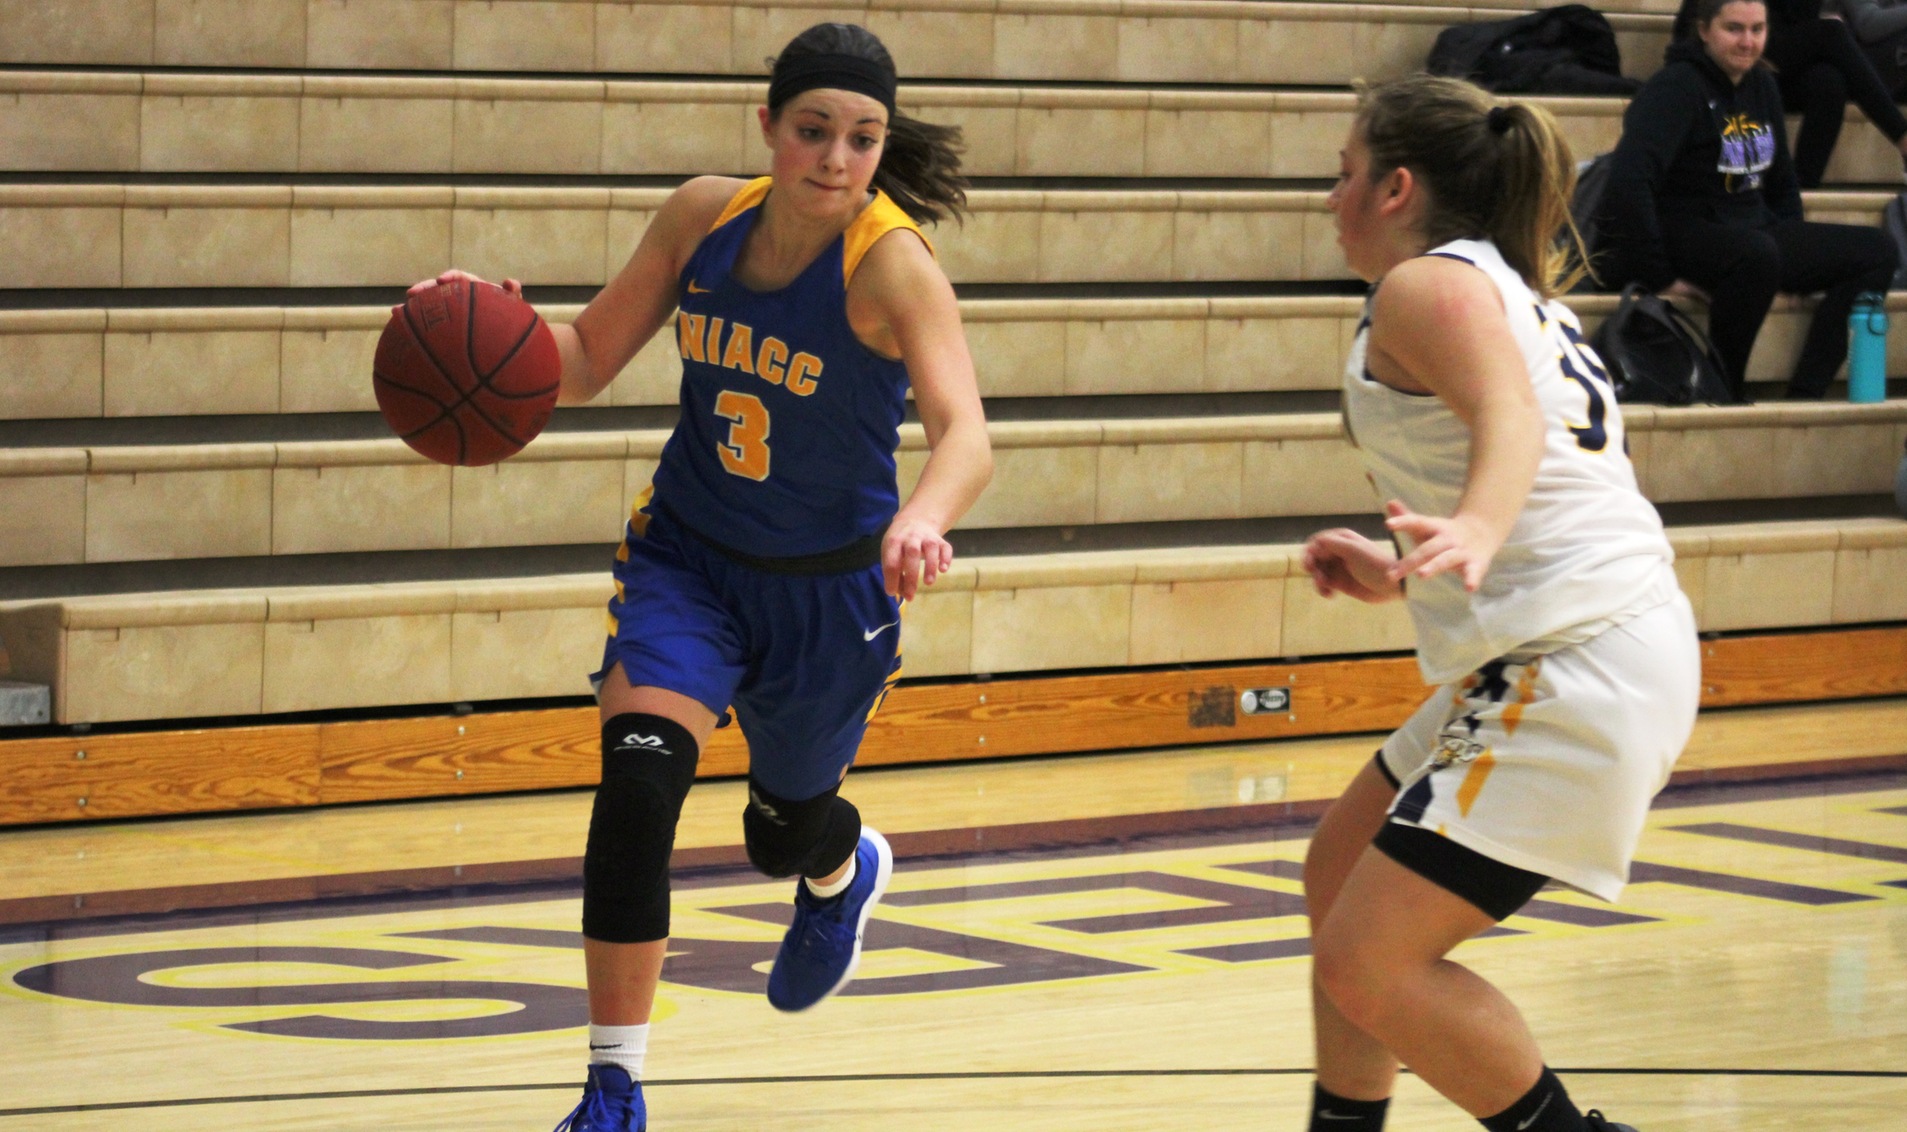 NIACC's Mandy Willems drives to the basket during a game against Marshalltown CC earlier this season.